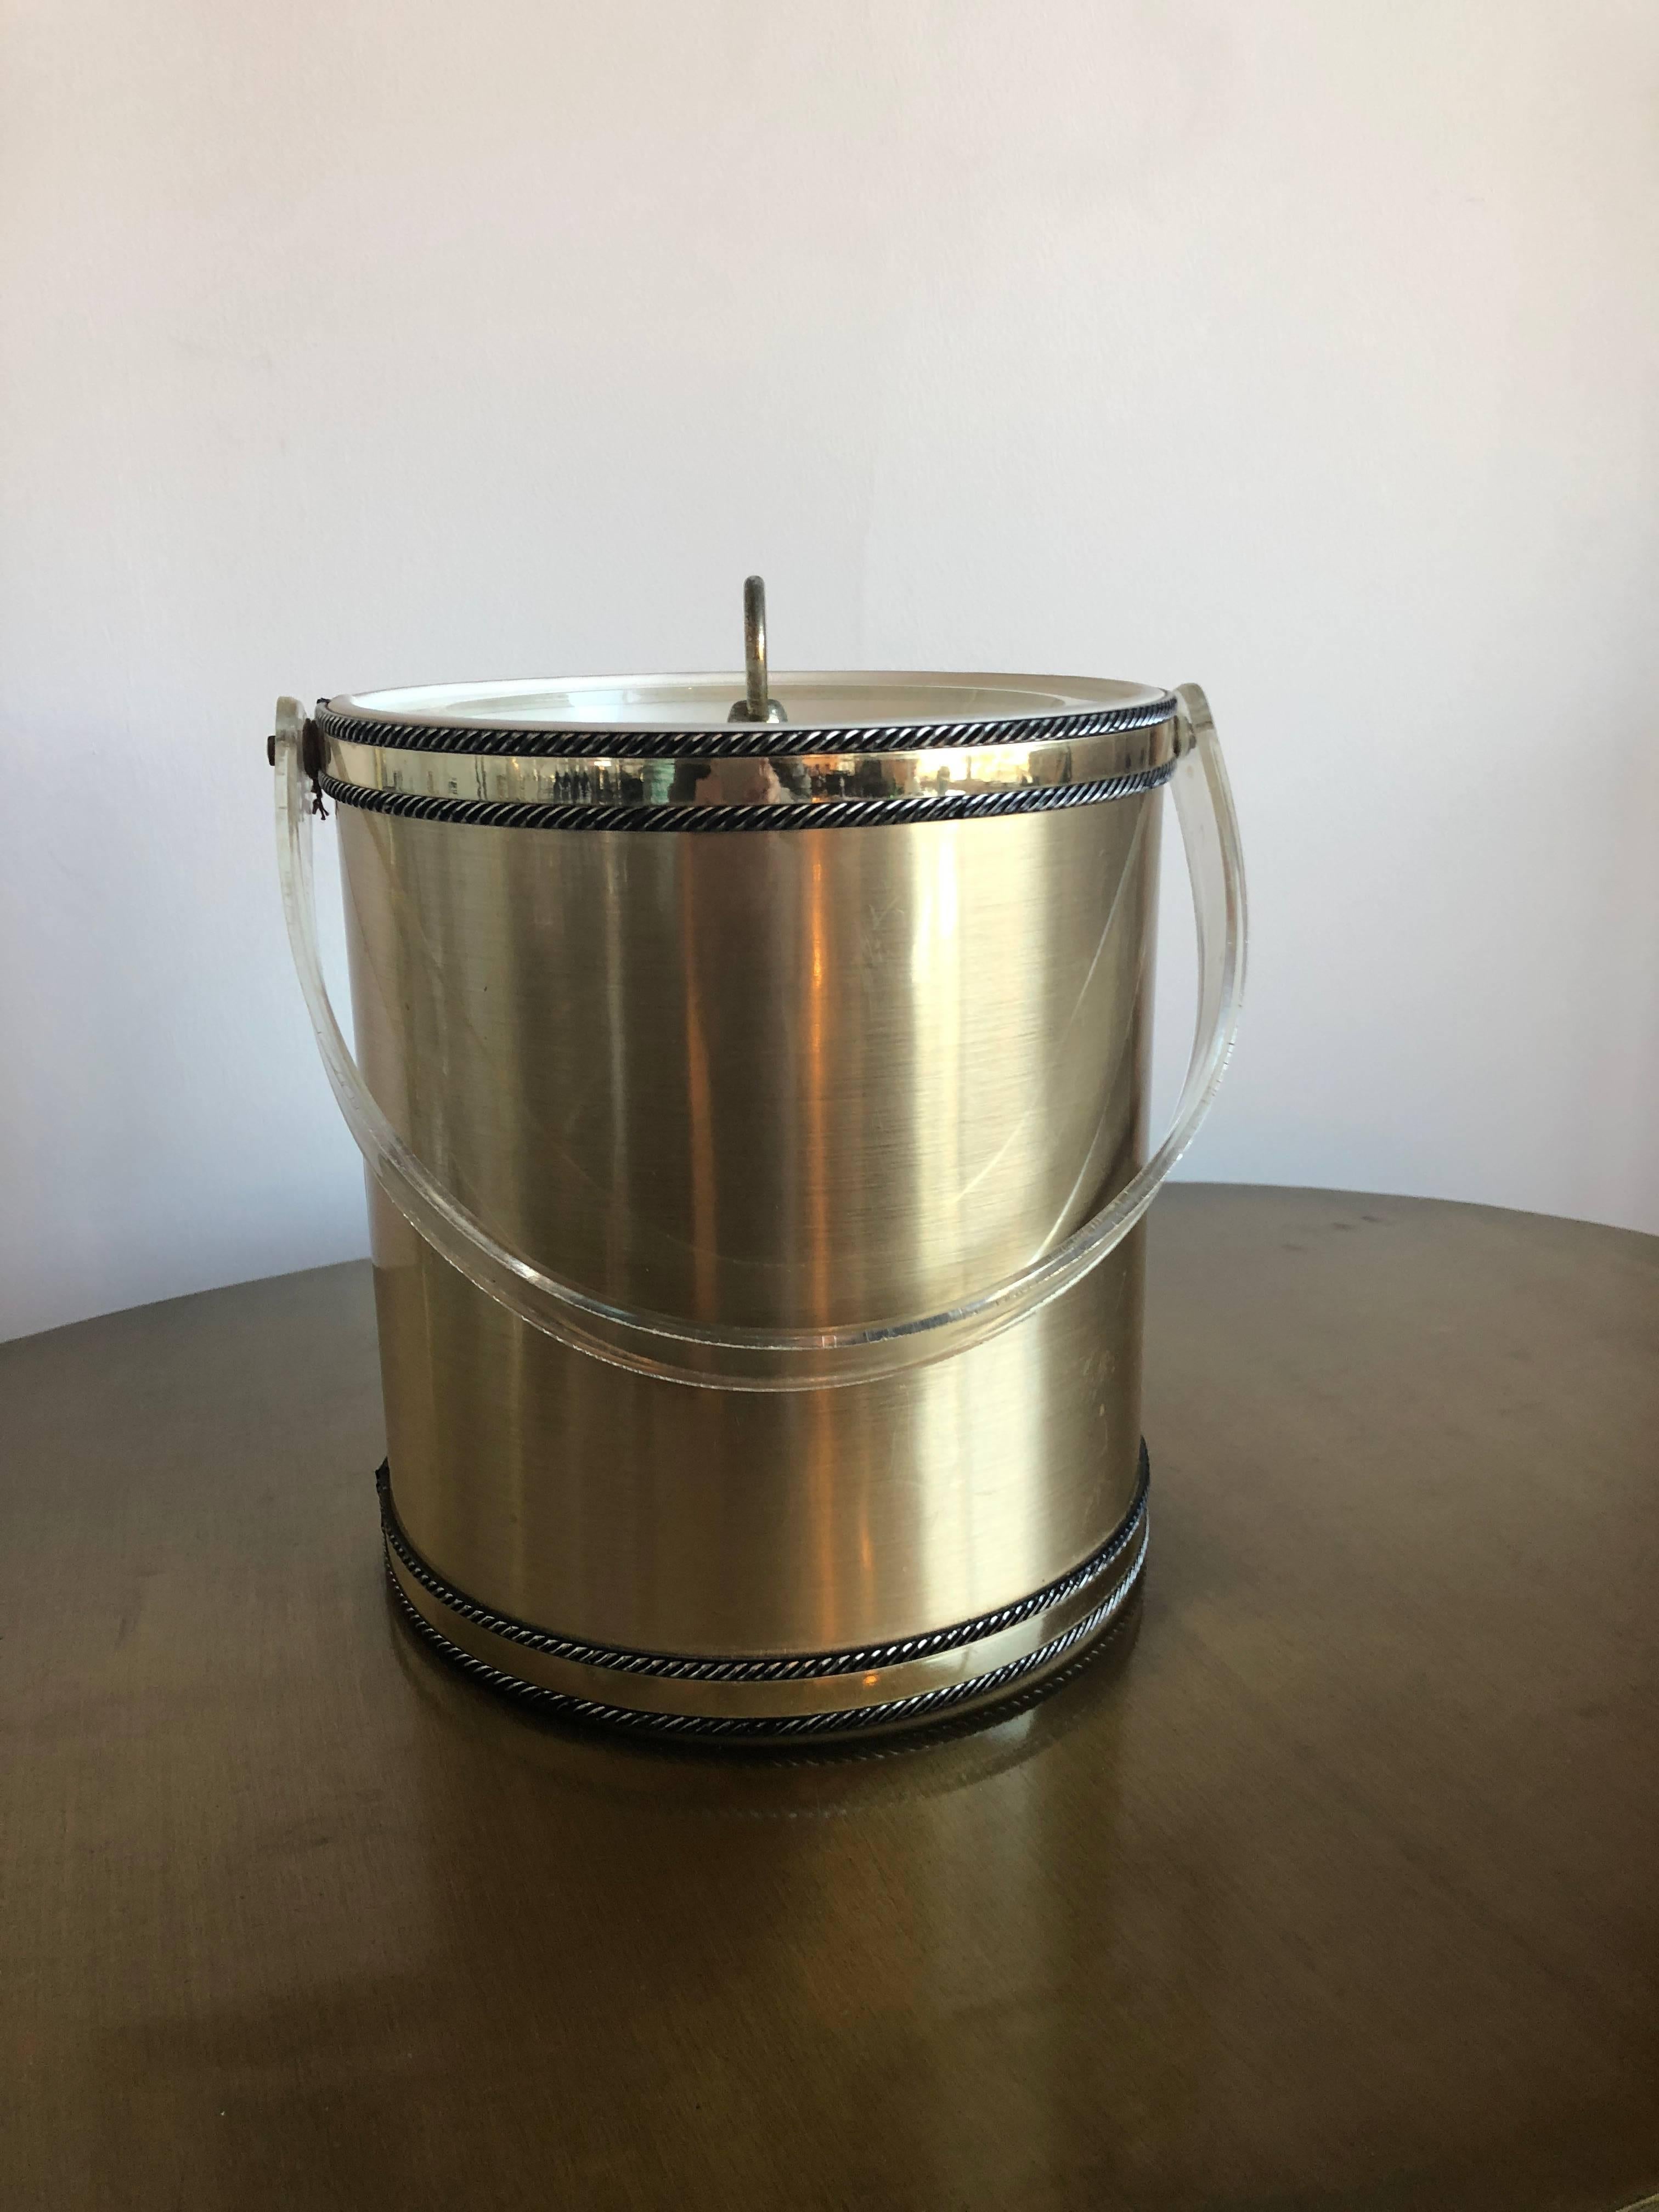 Offered is a signed Mid-Century Modern Georges Briard brushed brass and Lucite ice bucket. The brushed brass ice bucket has a cylindrical shape with bands of polished brass at the top and bottom bordered by applied roping with a clear Lucite swing